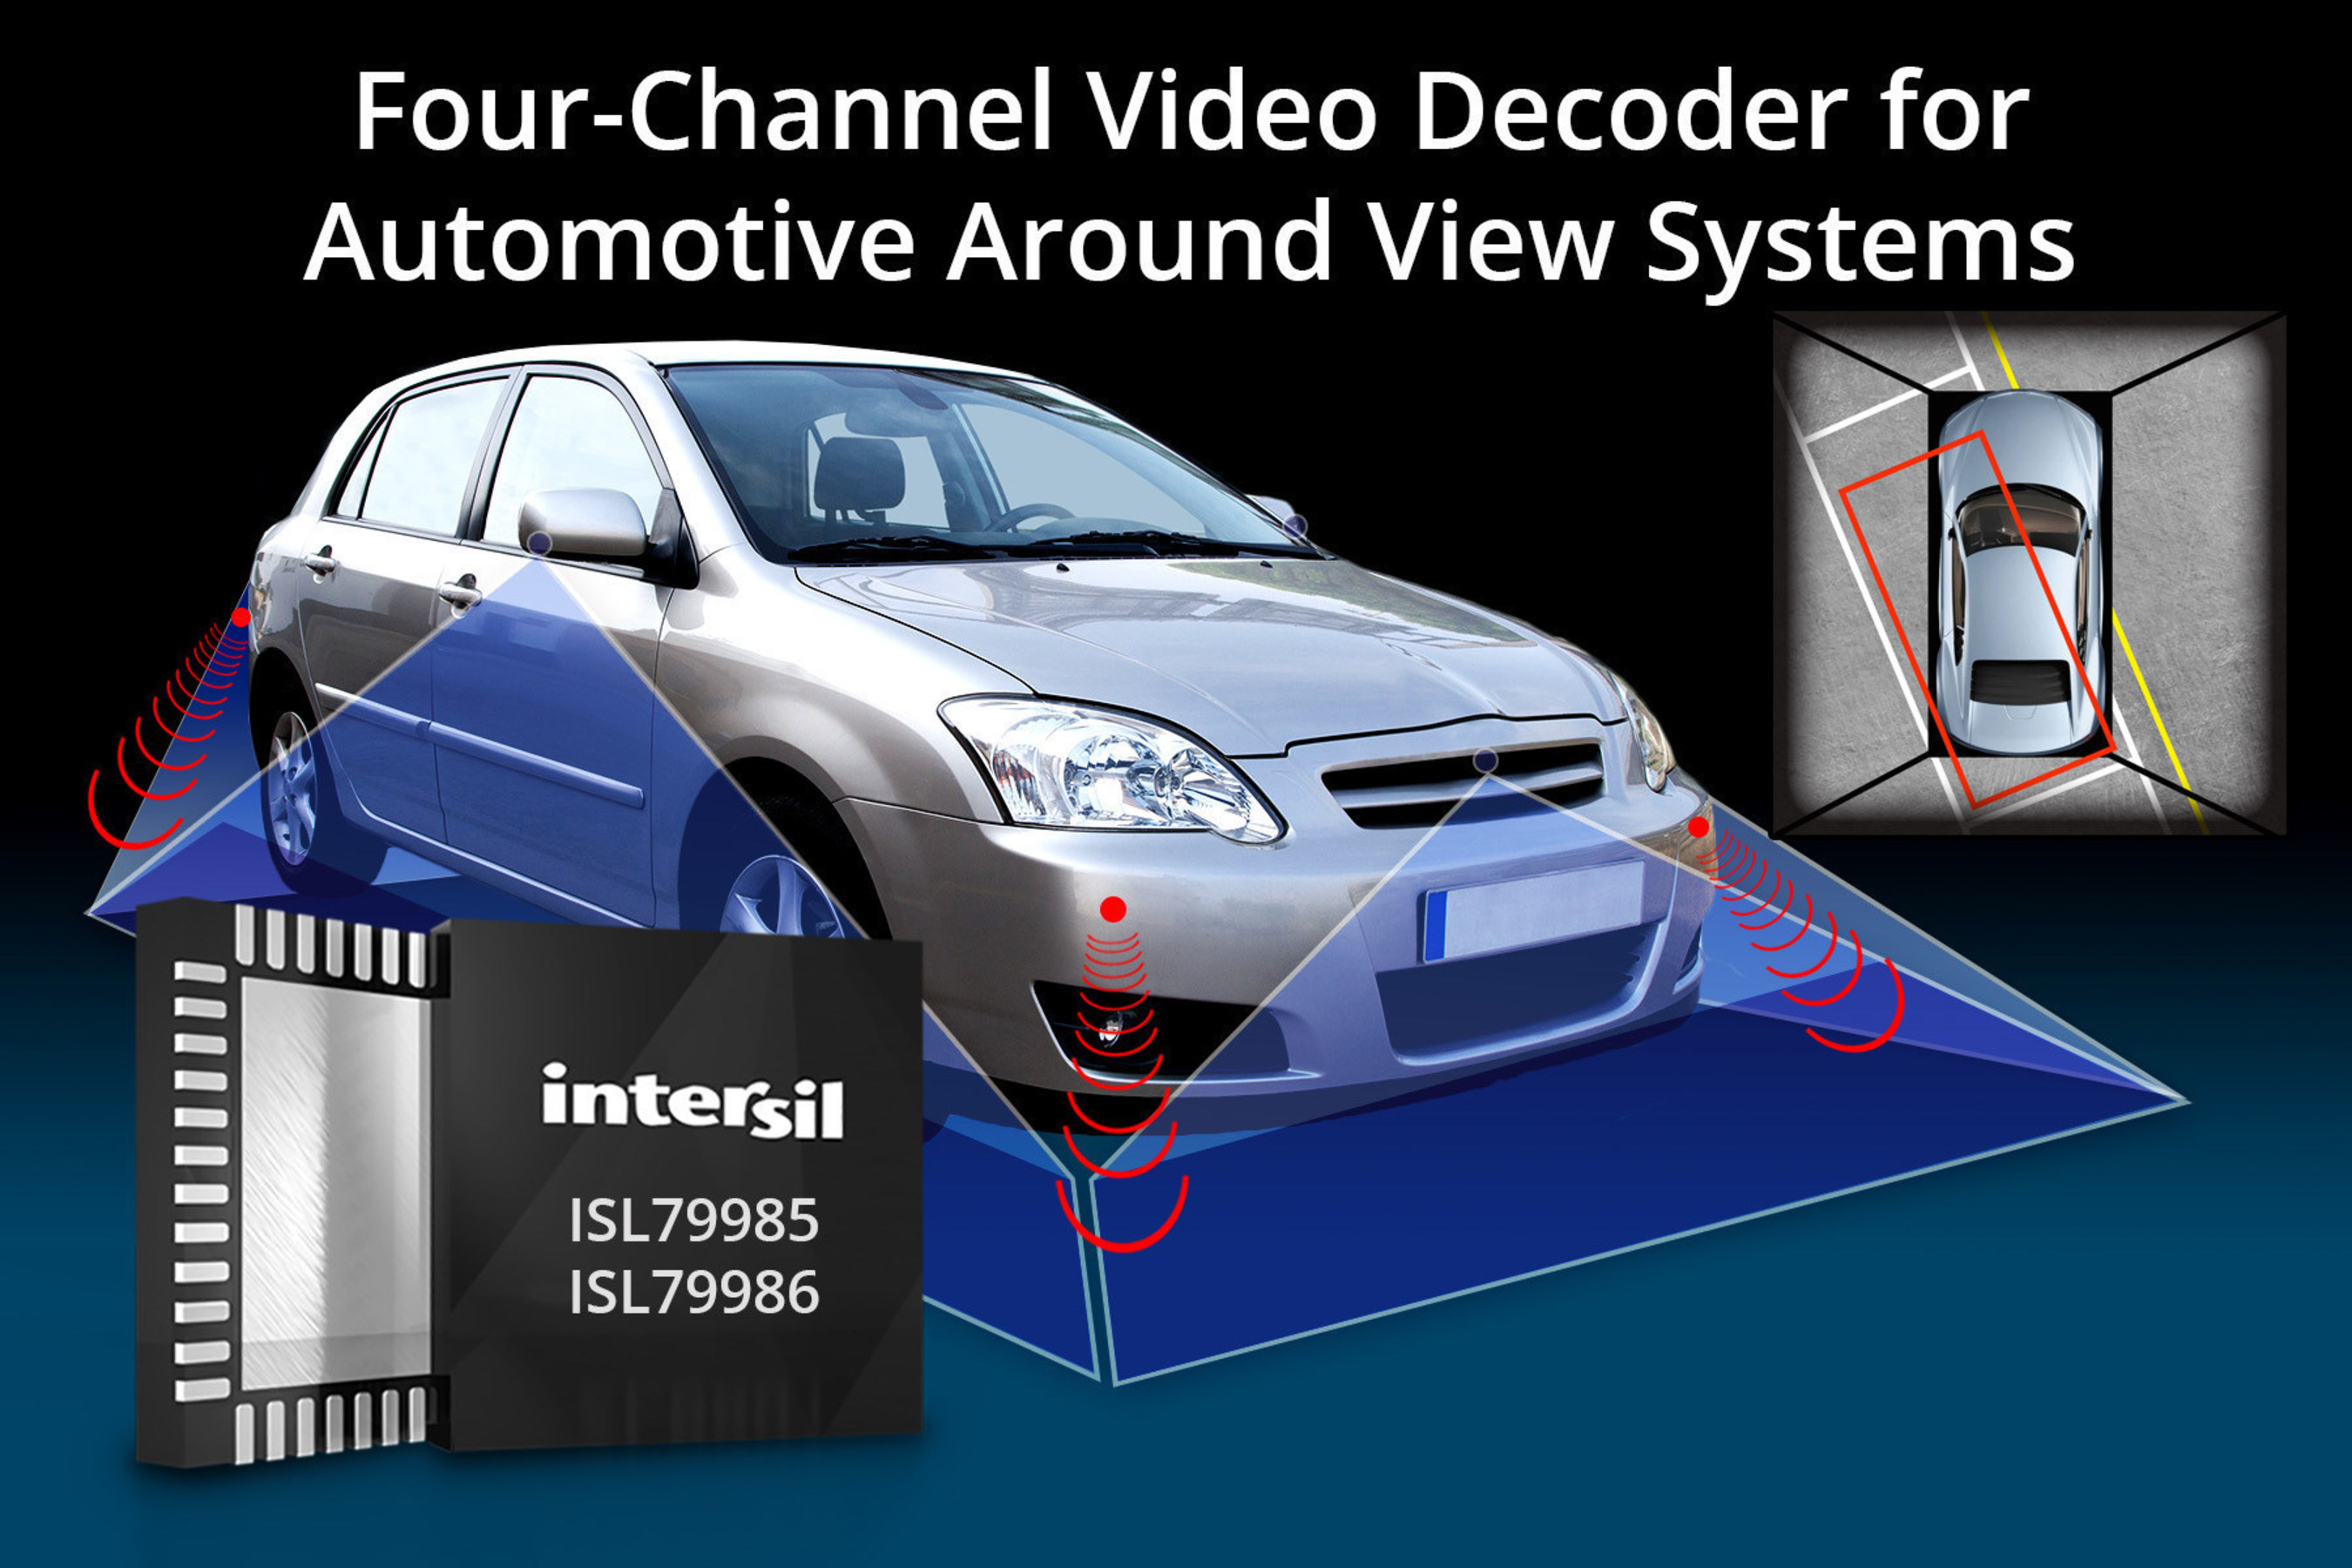 Intersil's ISL79985 four-channel video decoder with MIPI-CSI2 interface generates excellent 360-degree birds-eye image quality for advanced driver assistance systems.